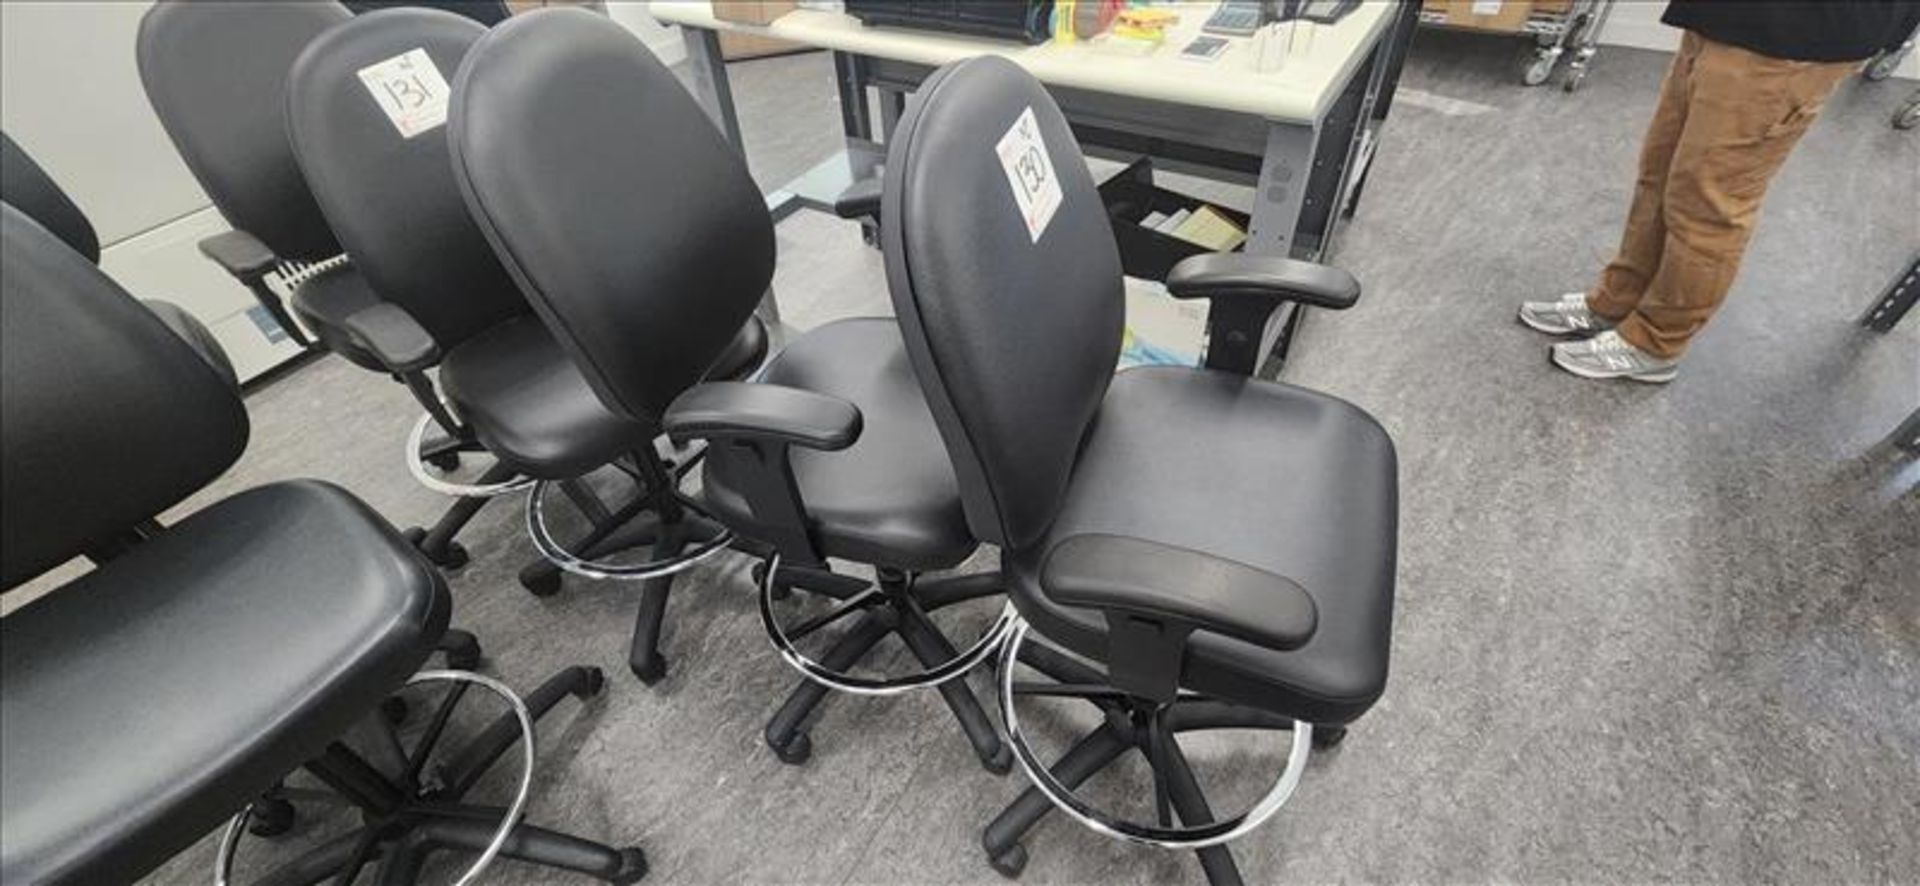 (2) Lab Chairs w/ arm rests, adjustable